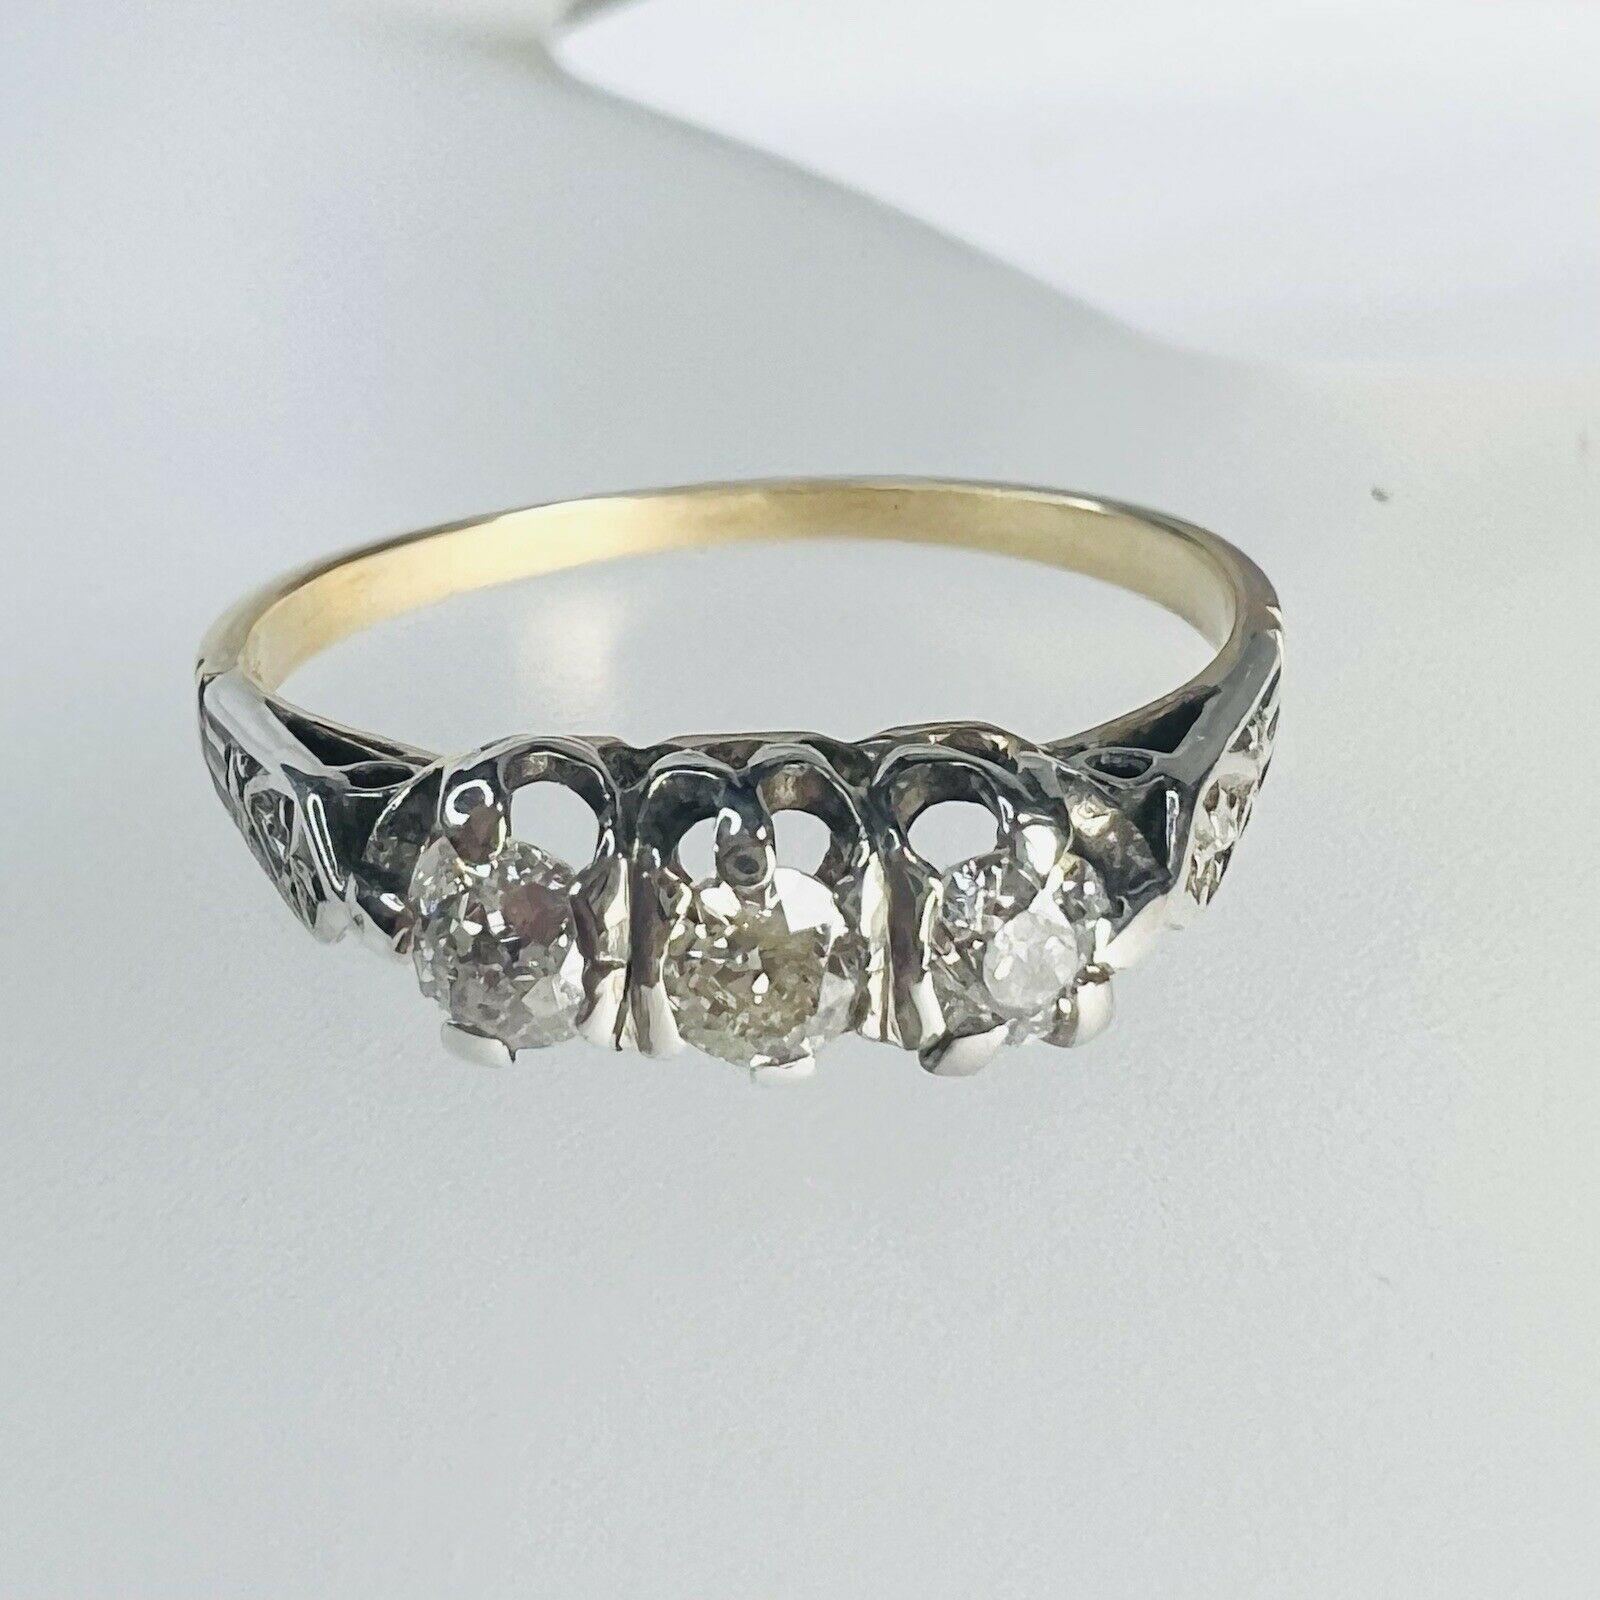 Presenting a,

 

Art Deco beauty with 2 chocolate diamond 1CTW prong set on a filigree engraved platinum and 18K Yellow gold band.

There are multiple rose cut diamonds decorated on the ring about 0.08CTW

The Ring is 20x10mm wide, 8mm Rise and